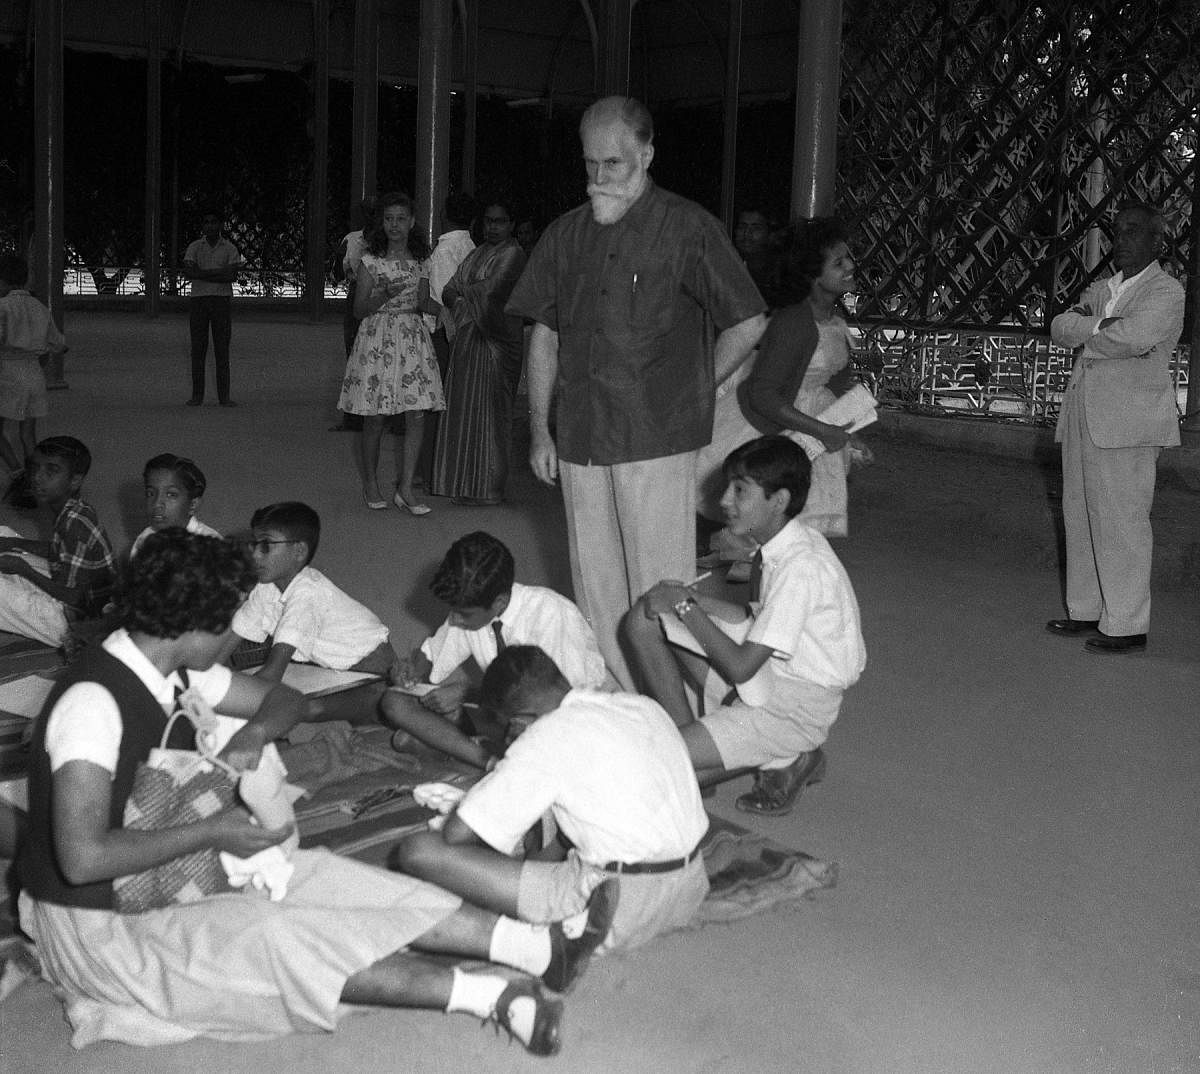 Veteran painter Nikolas Rorich observes children engaged in on the spot painting contest organised Junior Chamber of Commerce at Lalbagh Glass house in Bangalore_10-11-1963Svetoslav Roerich Photos.